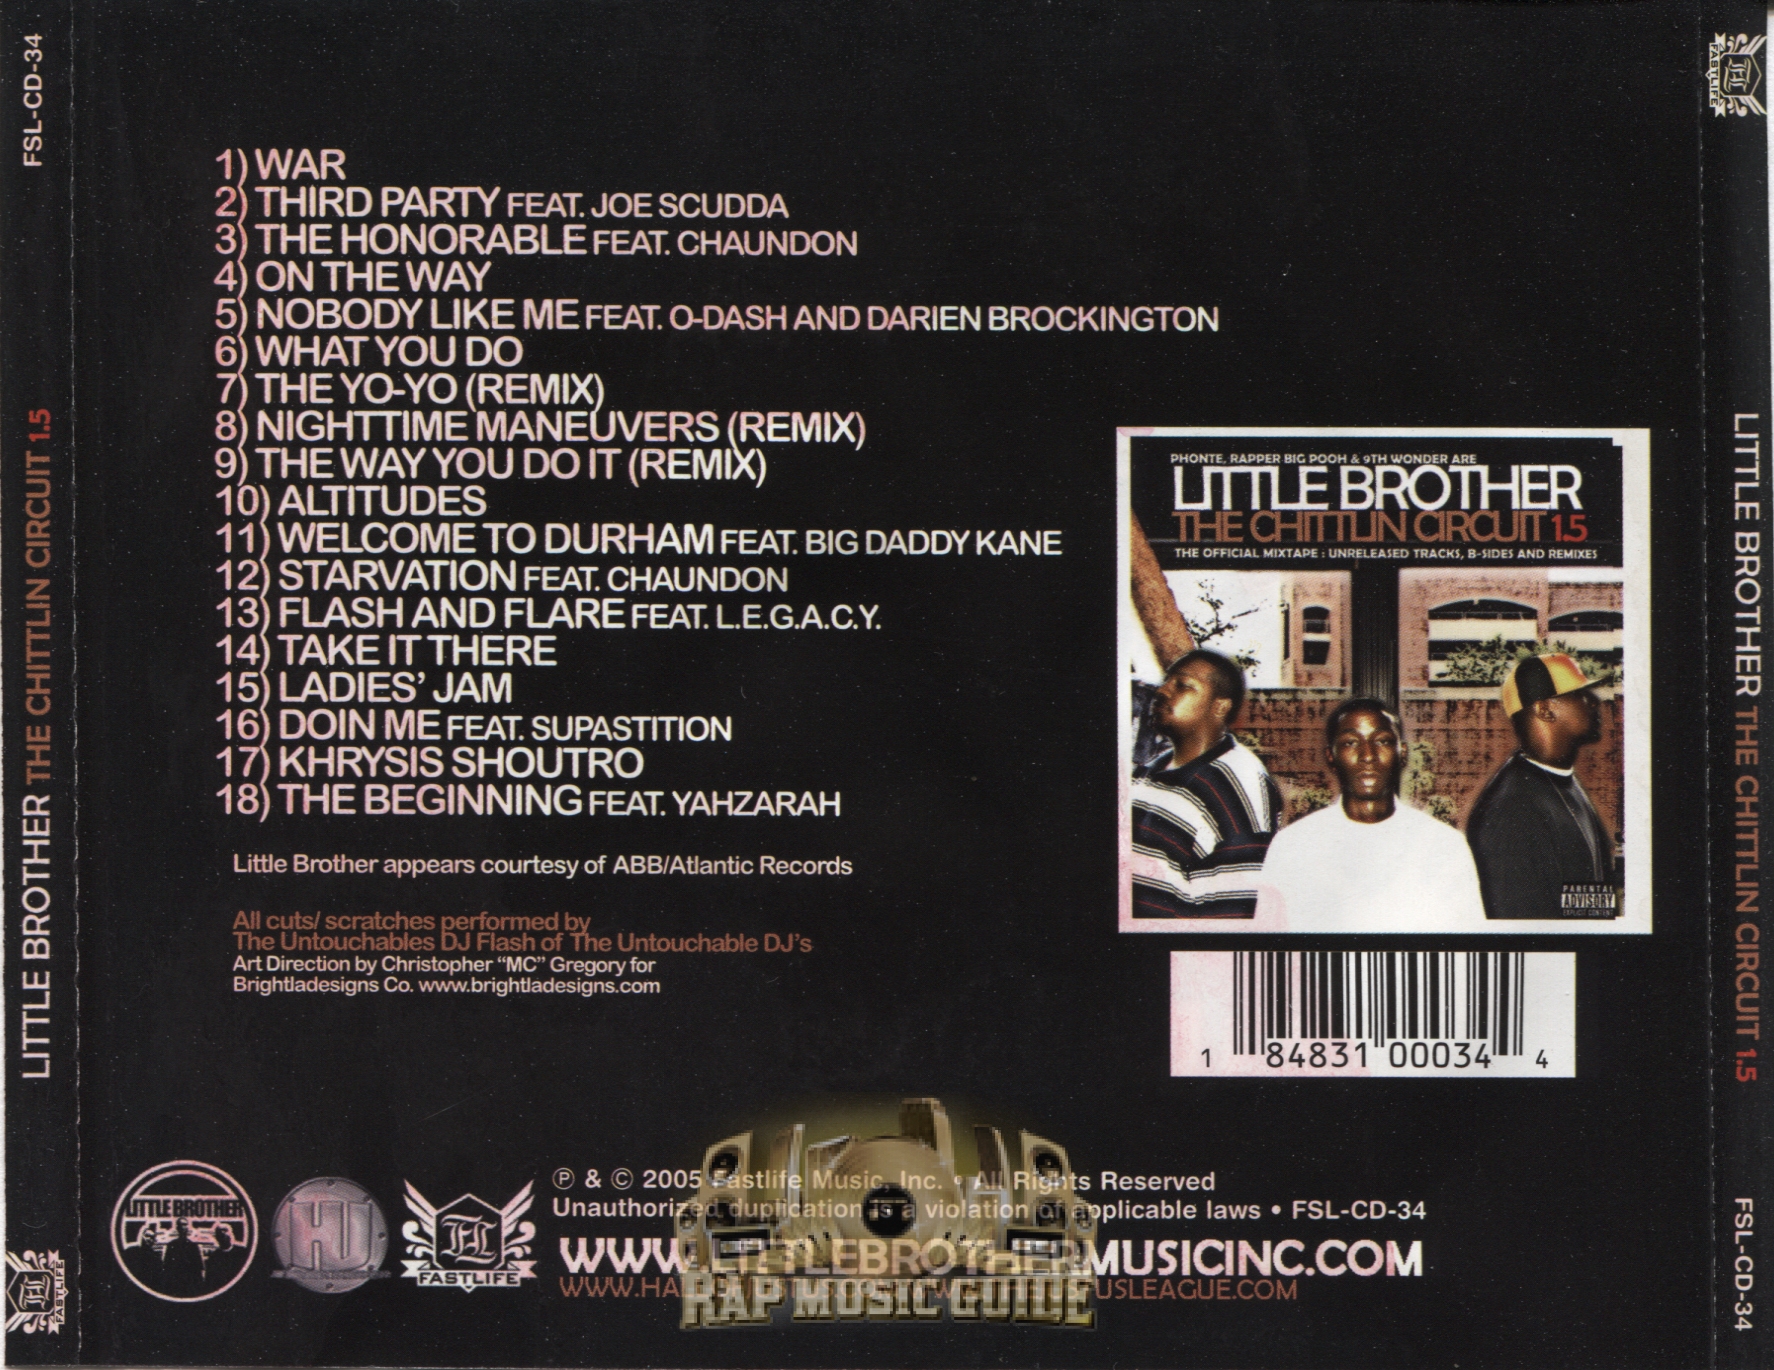 Little Brother - The Chittlin Circuit 1.5: CD | Rap Music Guide